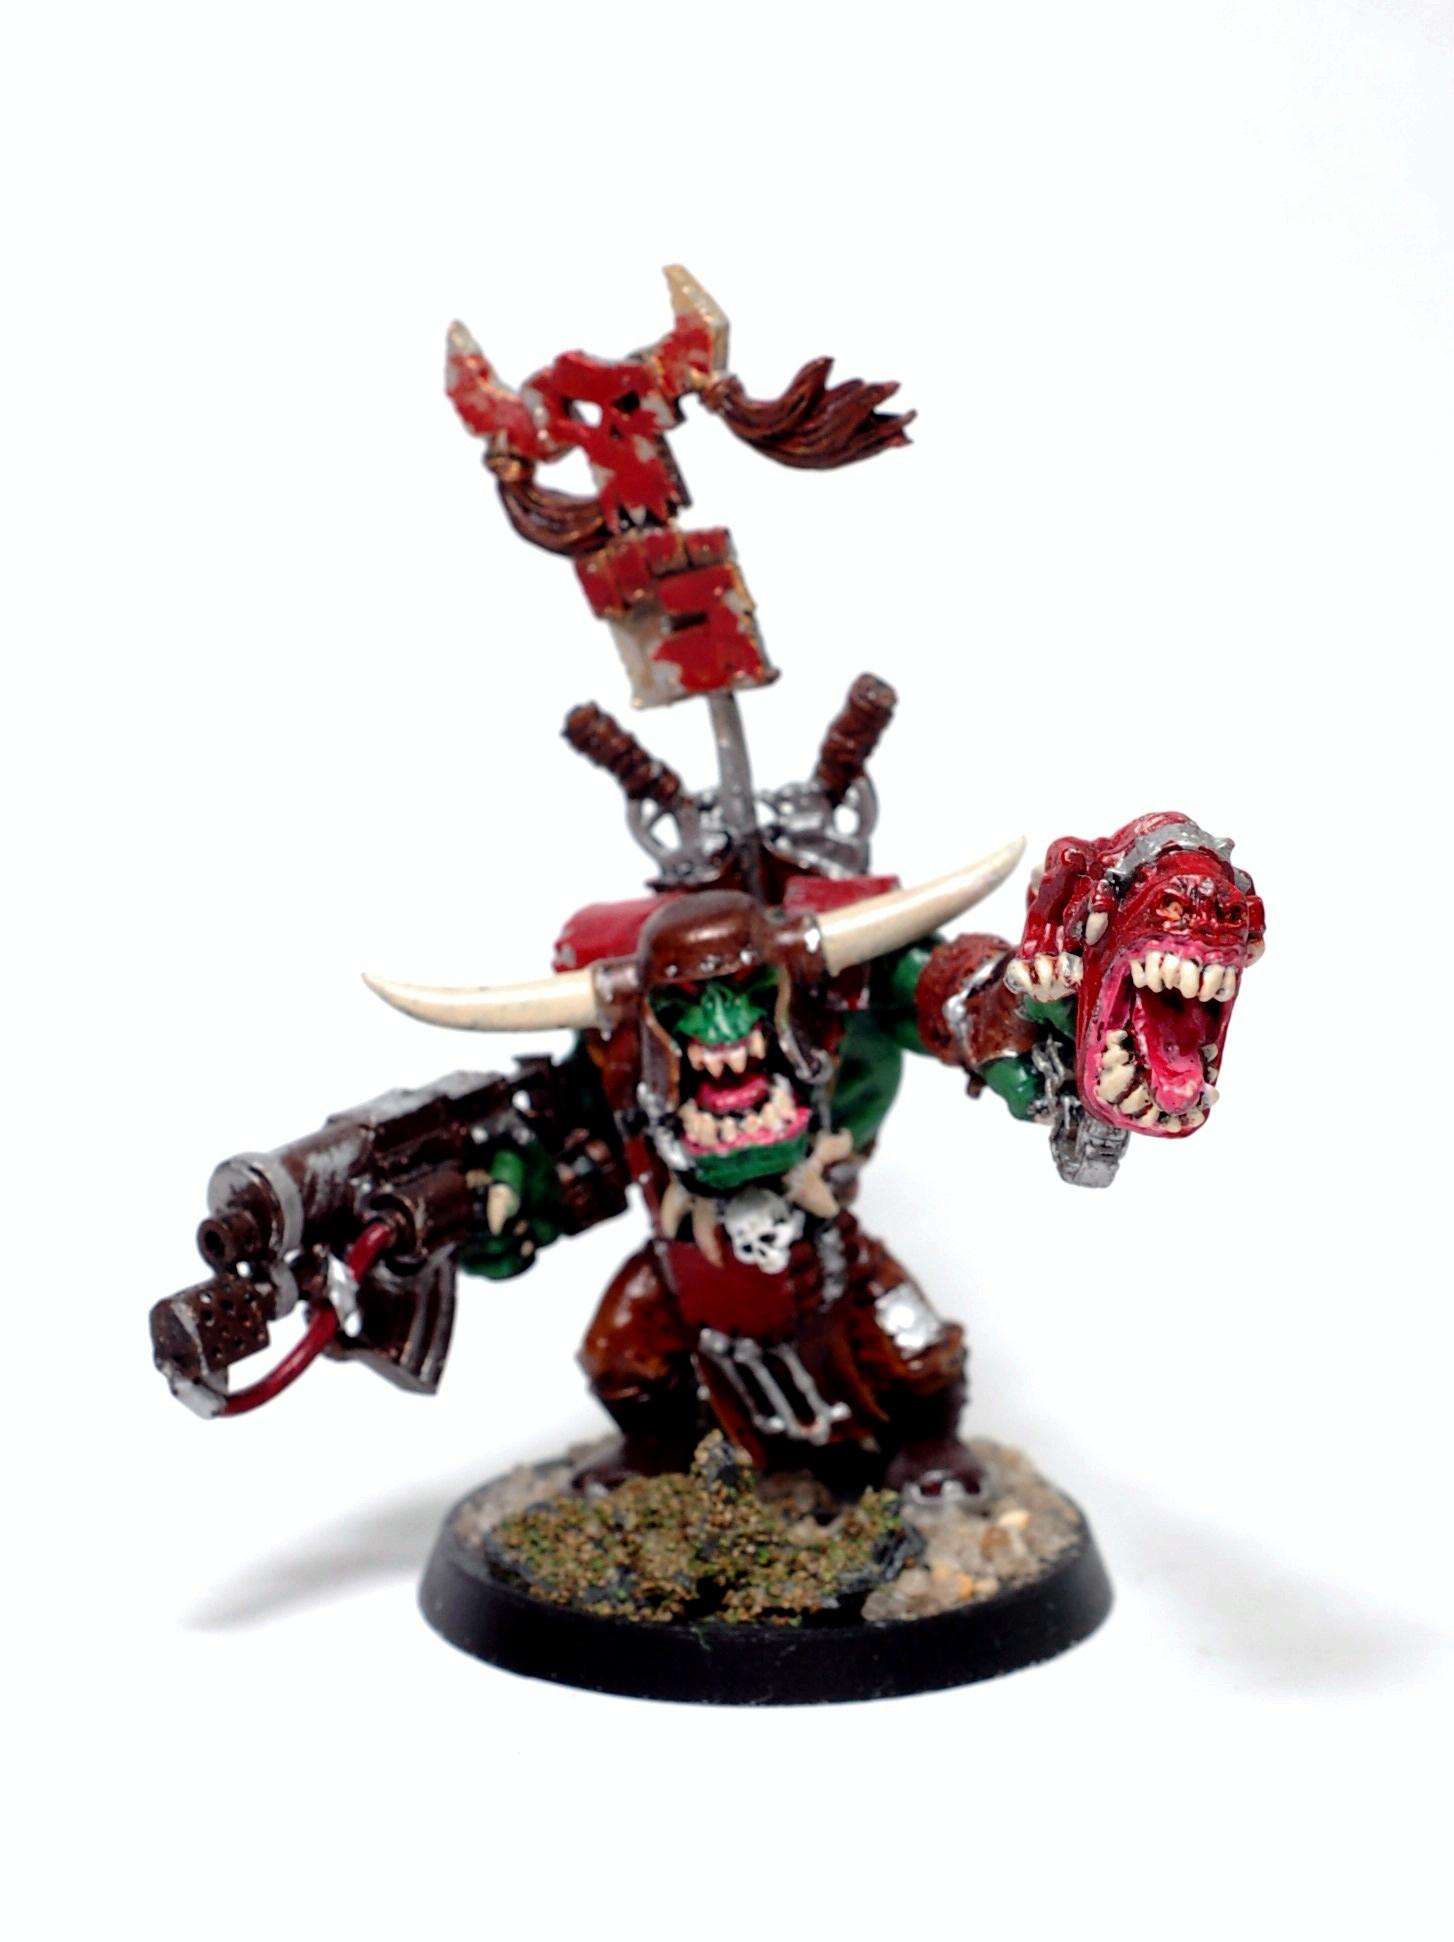 One of first works about ORKZ (focus on squig)